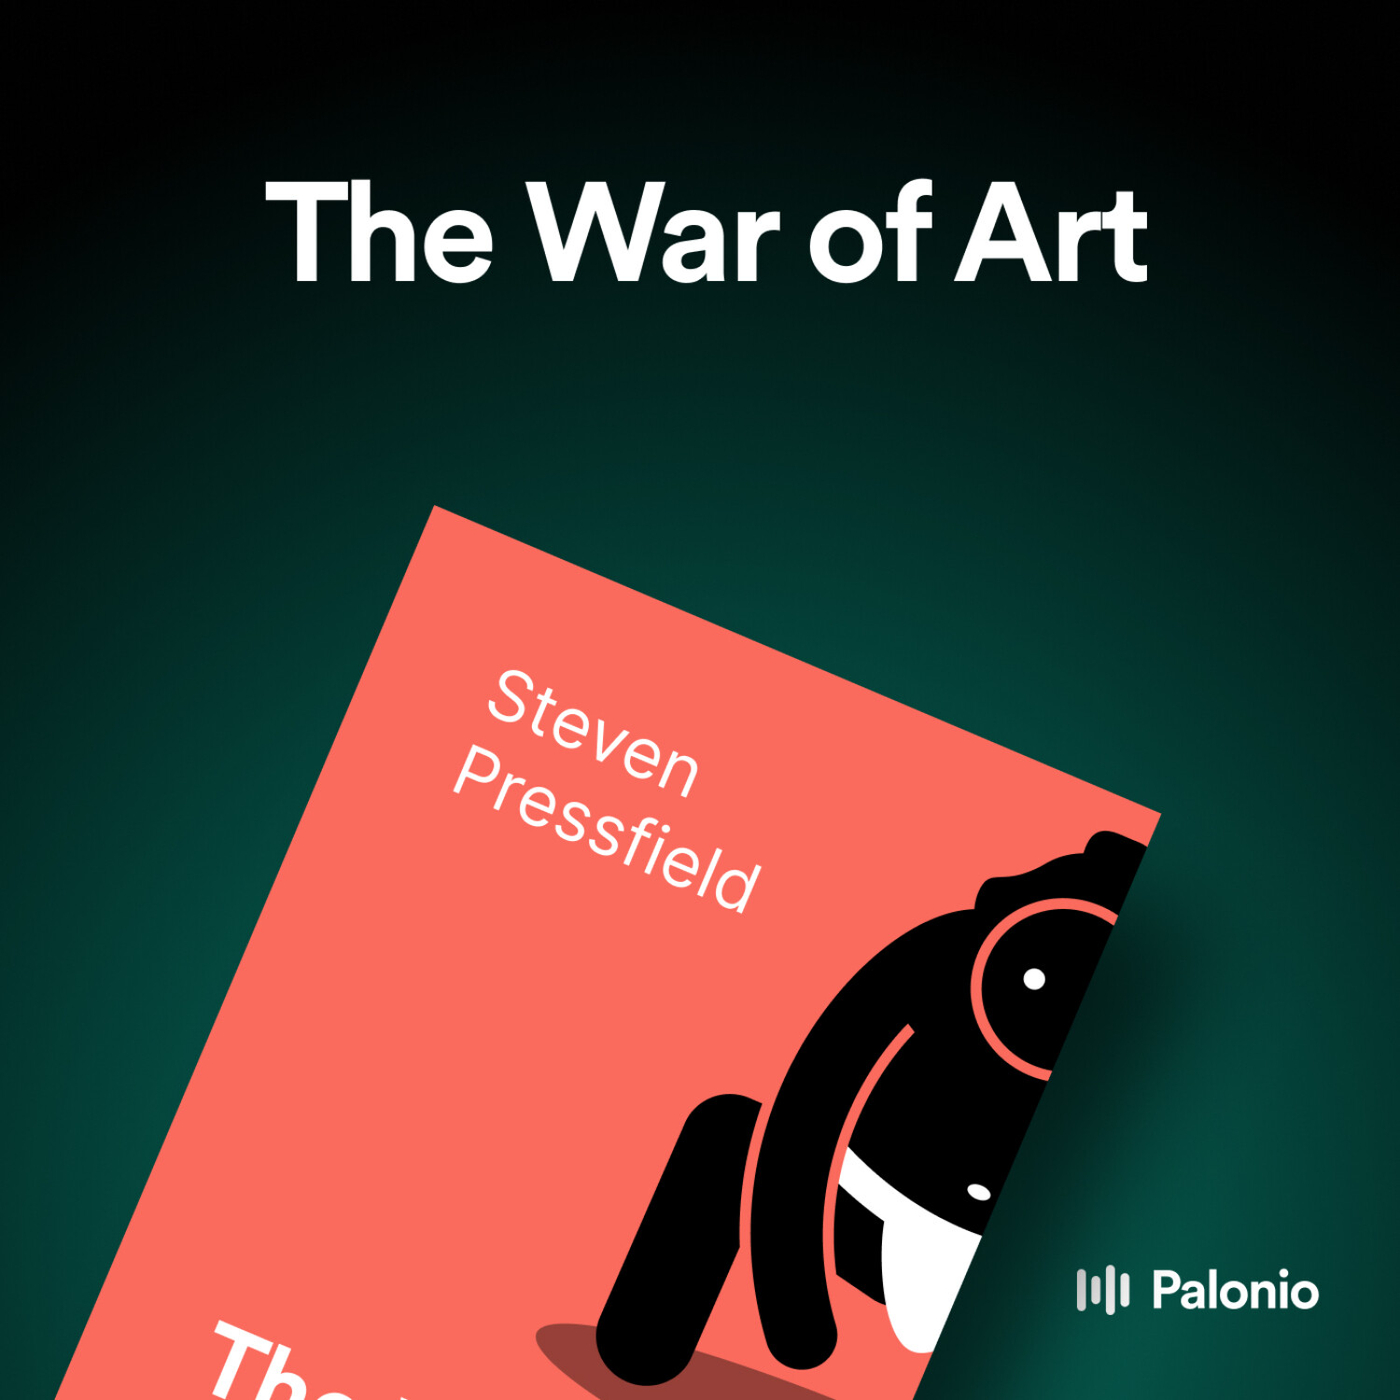 The War of Art by Steven Pressfield - One Business Book per Day - Podcast.co